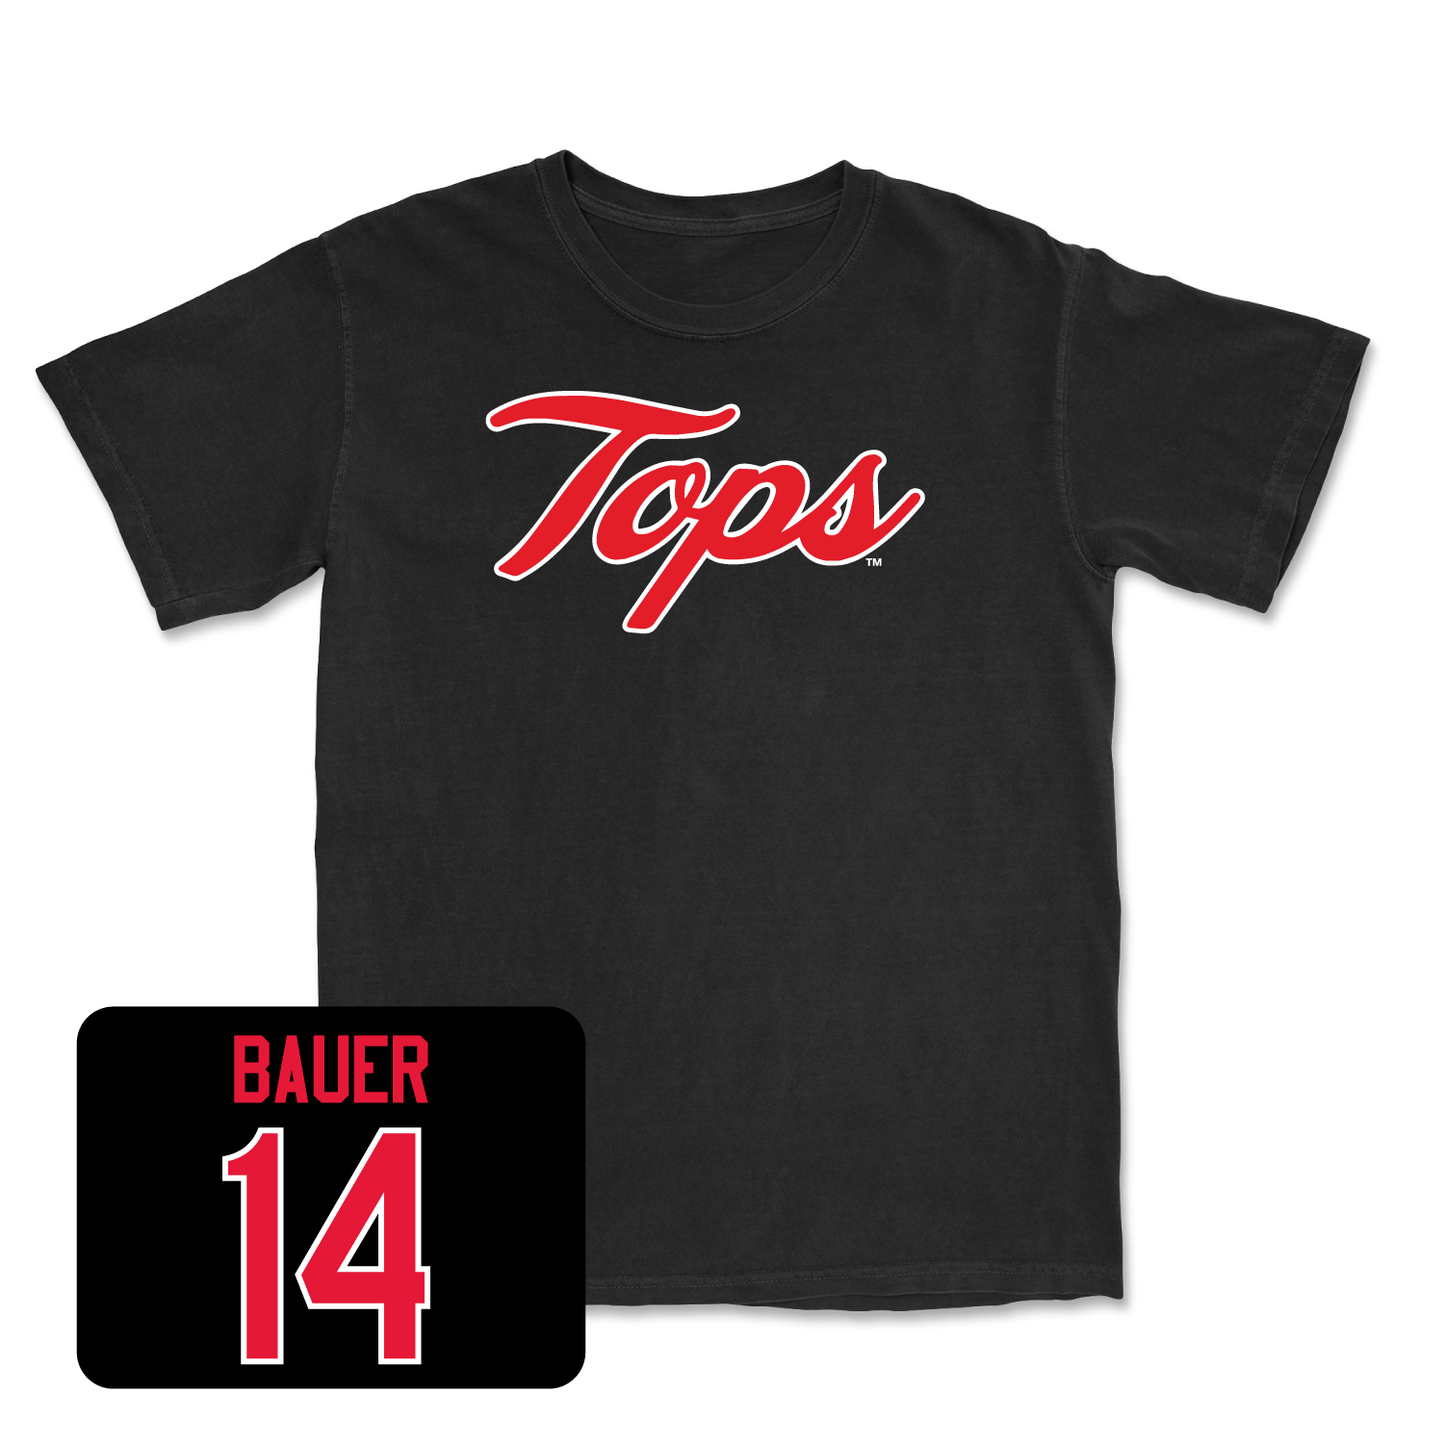 Black Women's Volleyball Tops Tee 3X-Large / Callie Bauer | #14